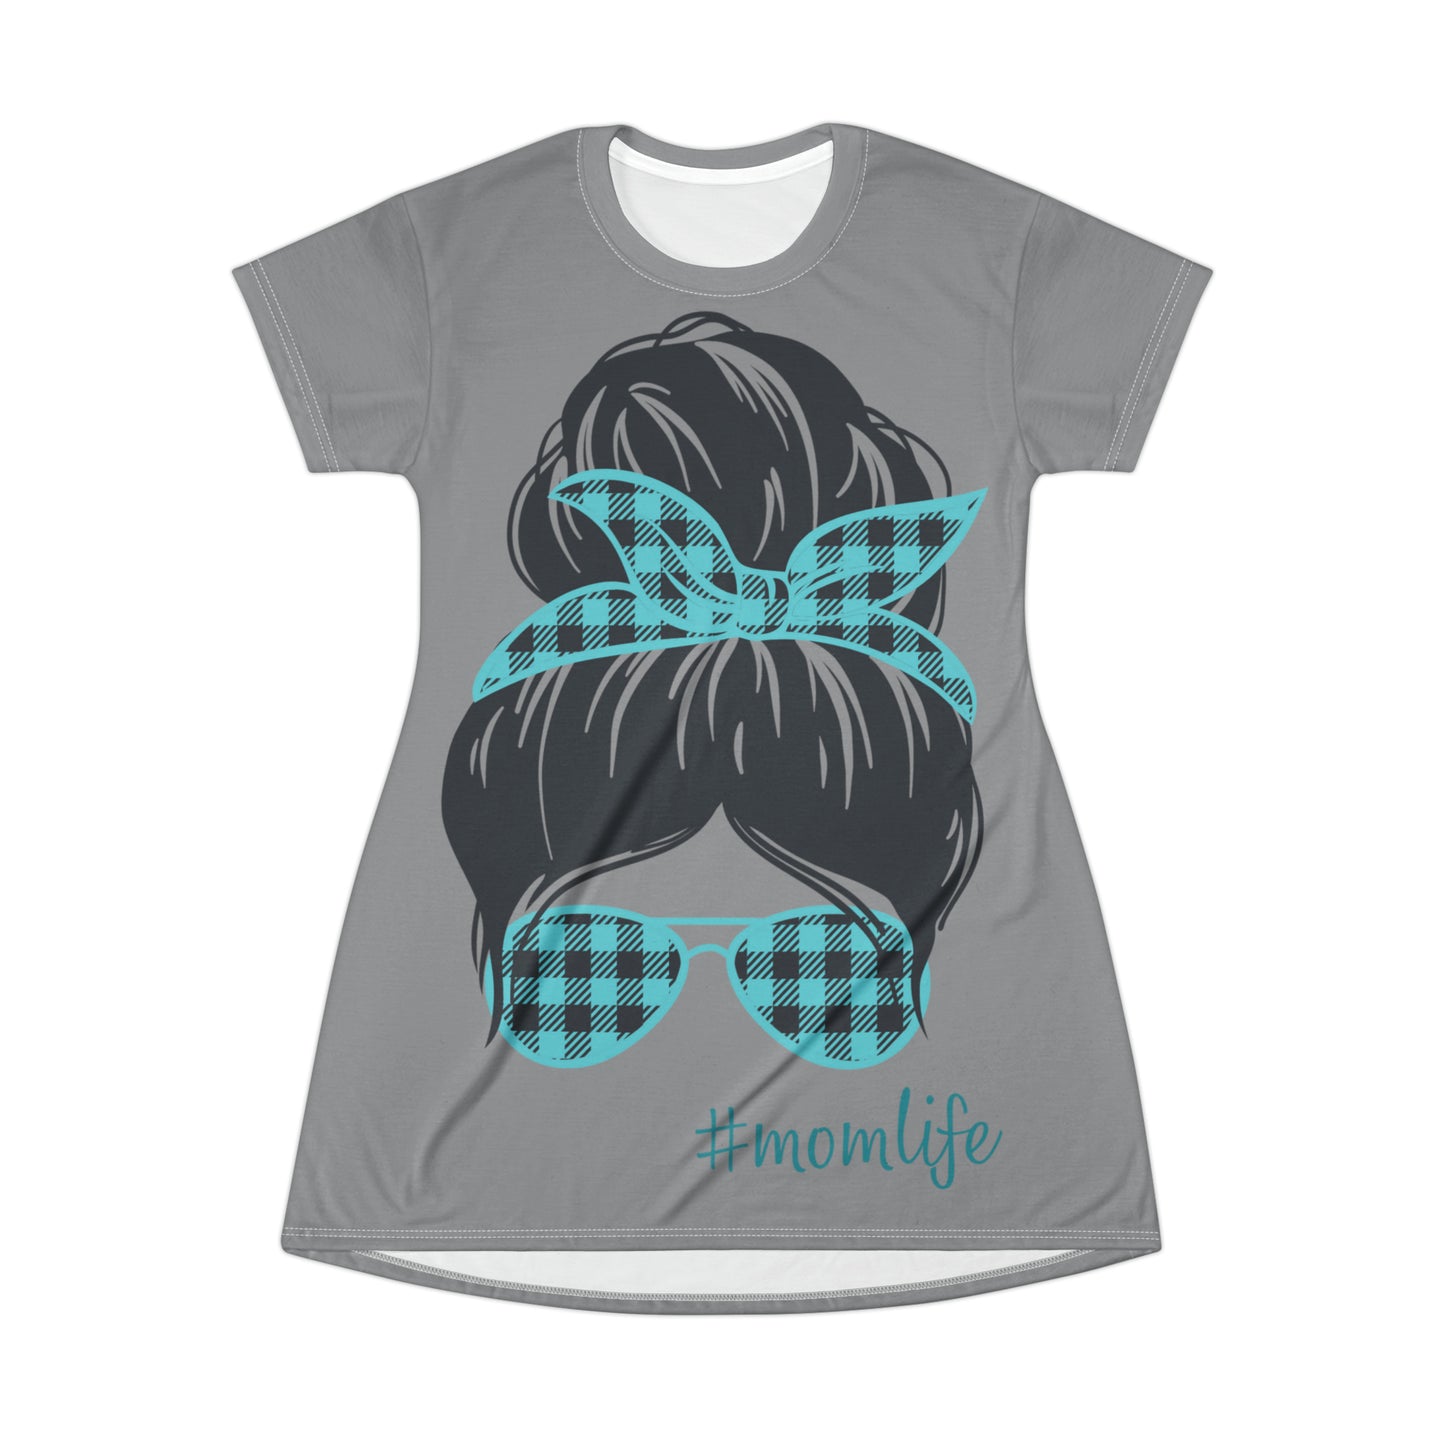 Mom Life - Mothers Day T-Shirt Dress